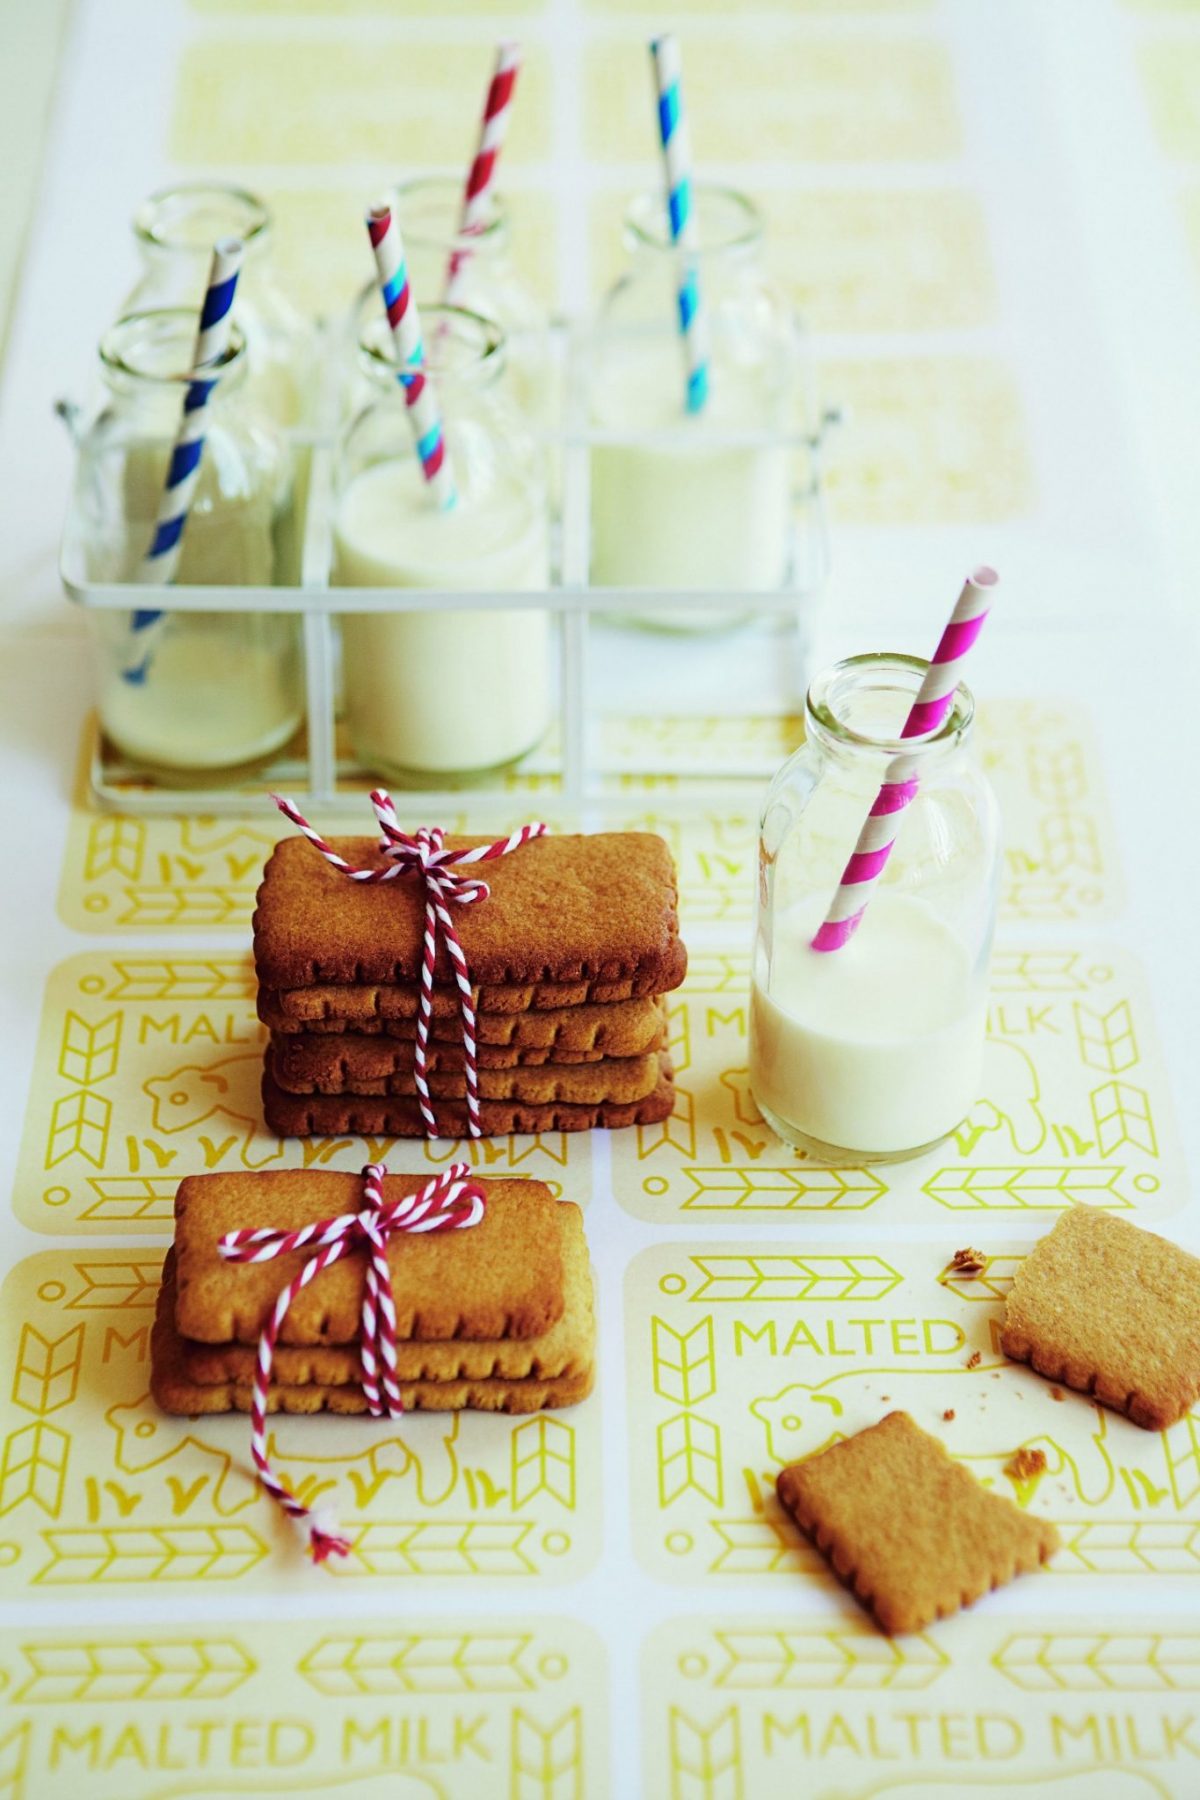 A candle flickers on a table filled with freshly-baked desserts and snacks.